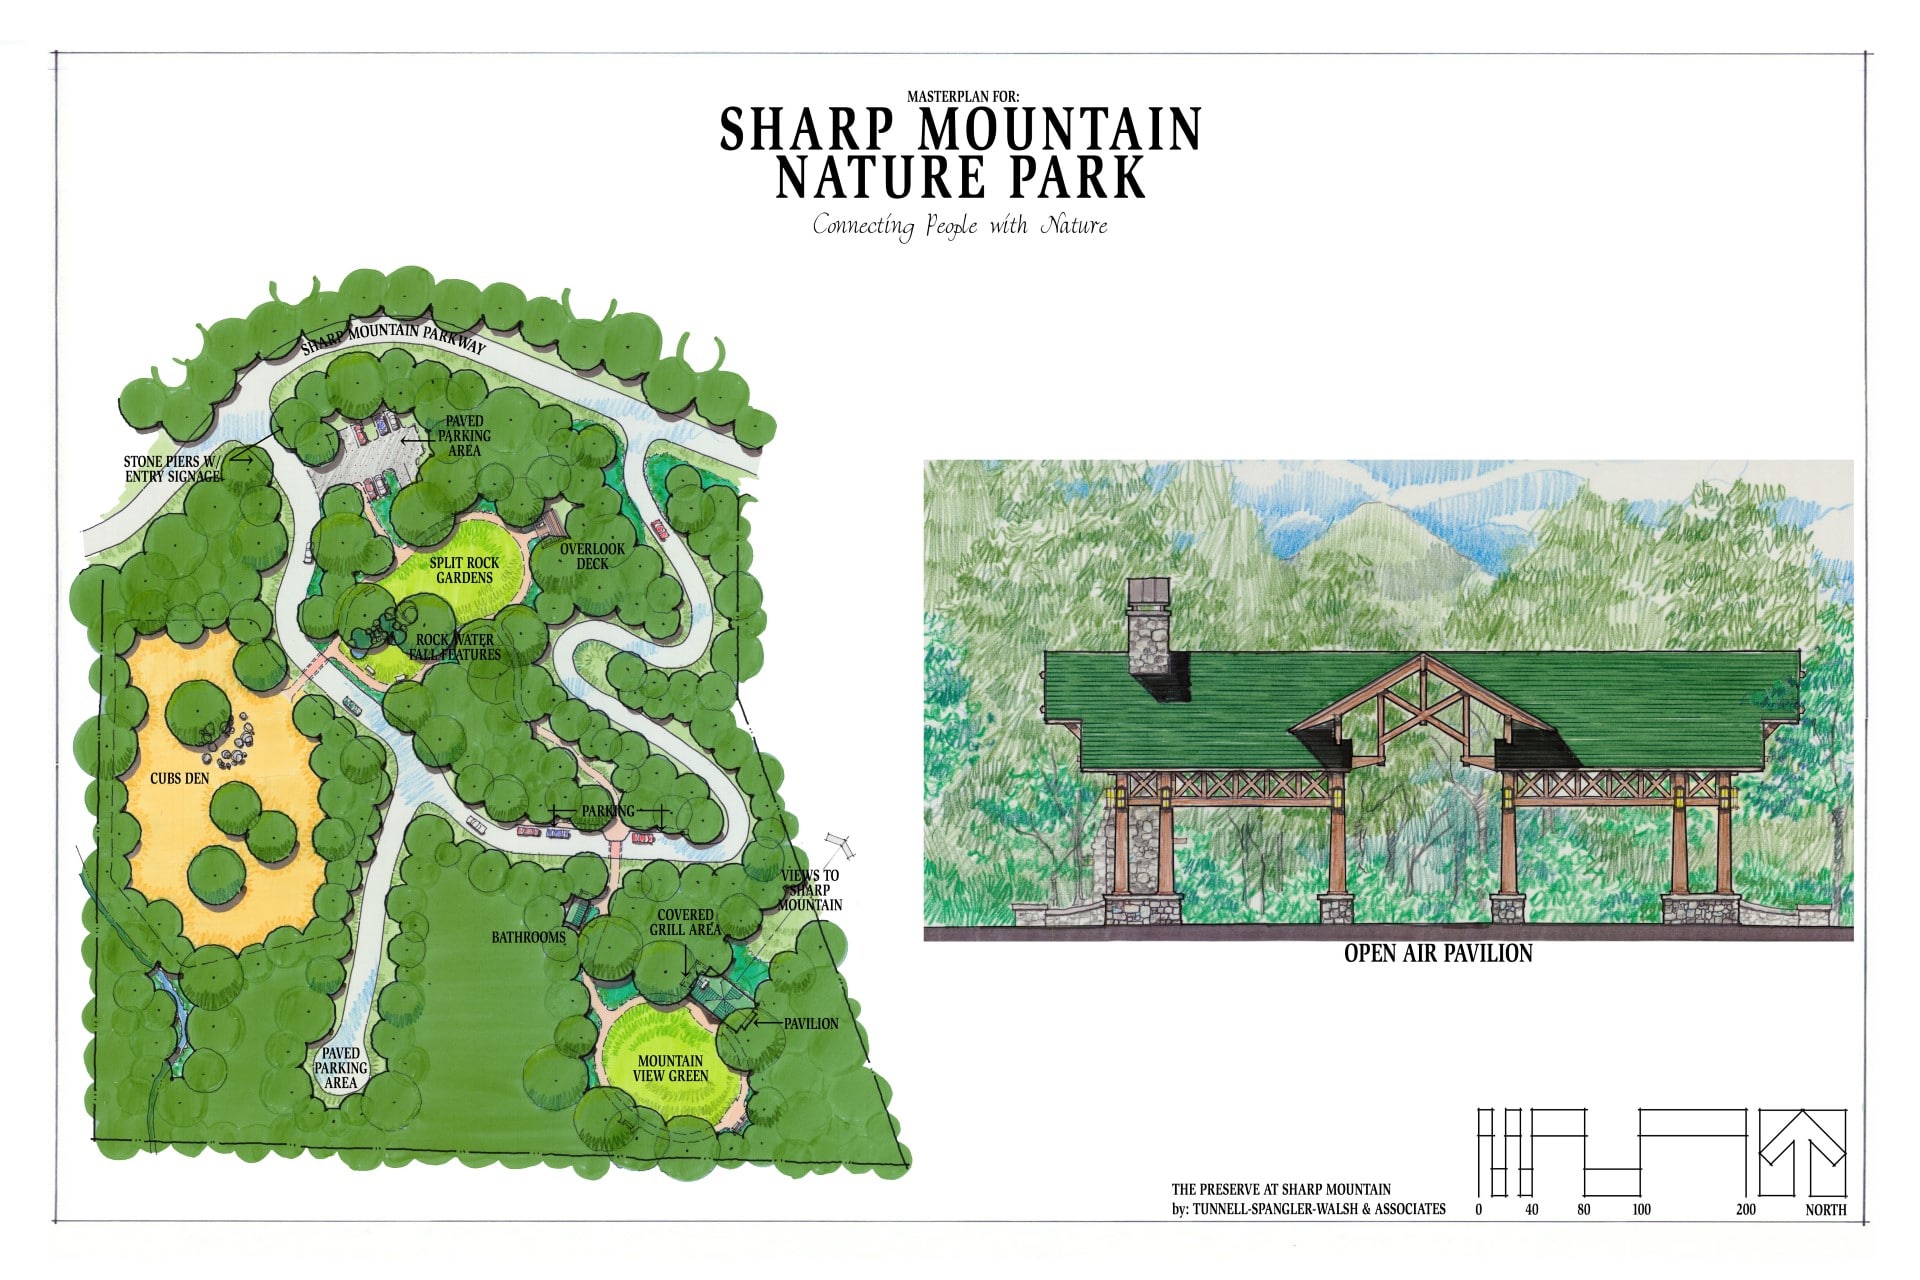 The Preserve at Sharp Mountain